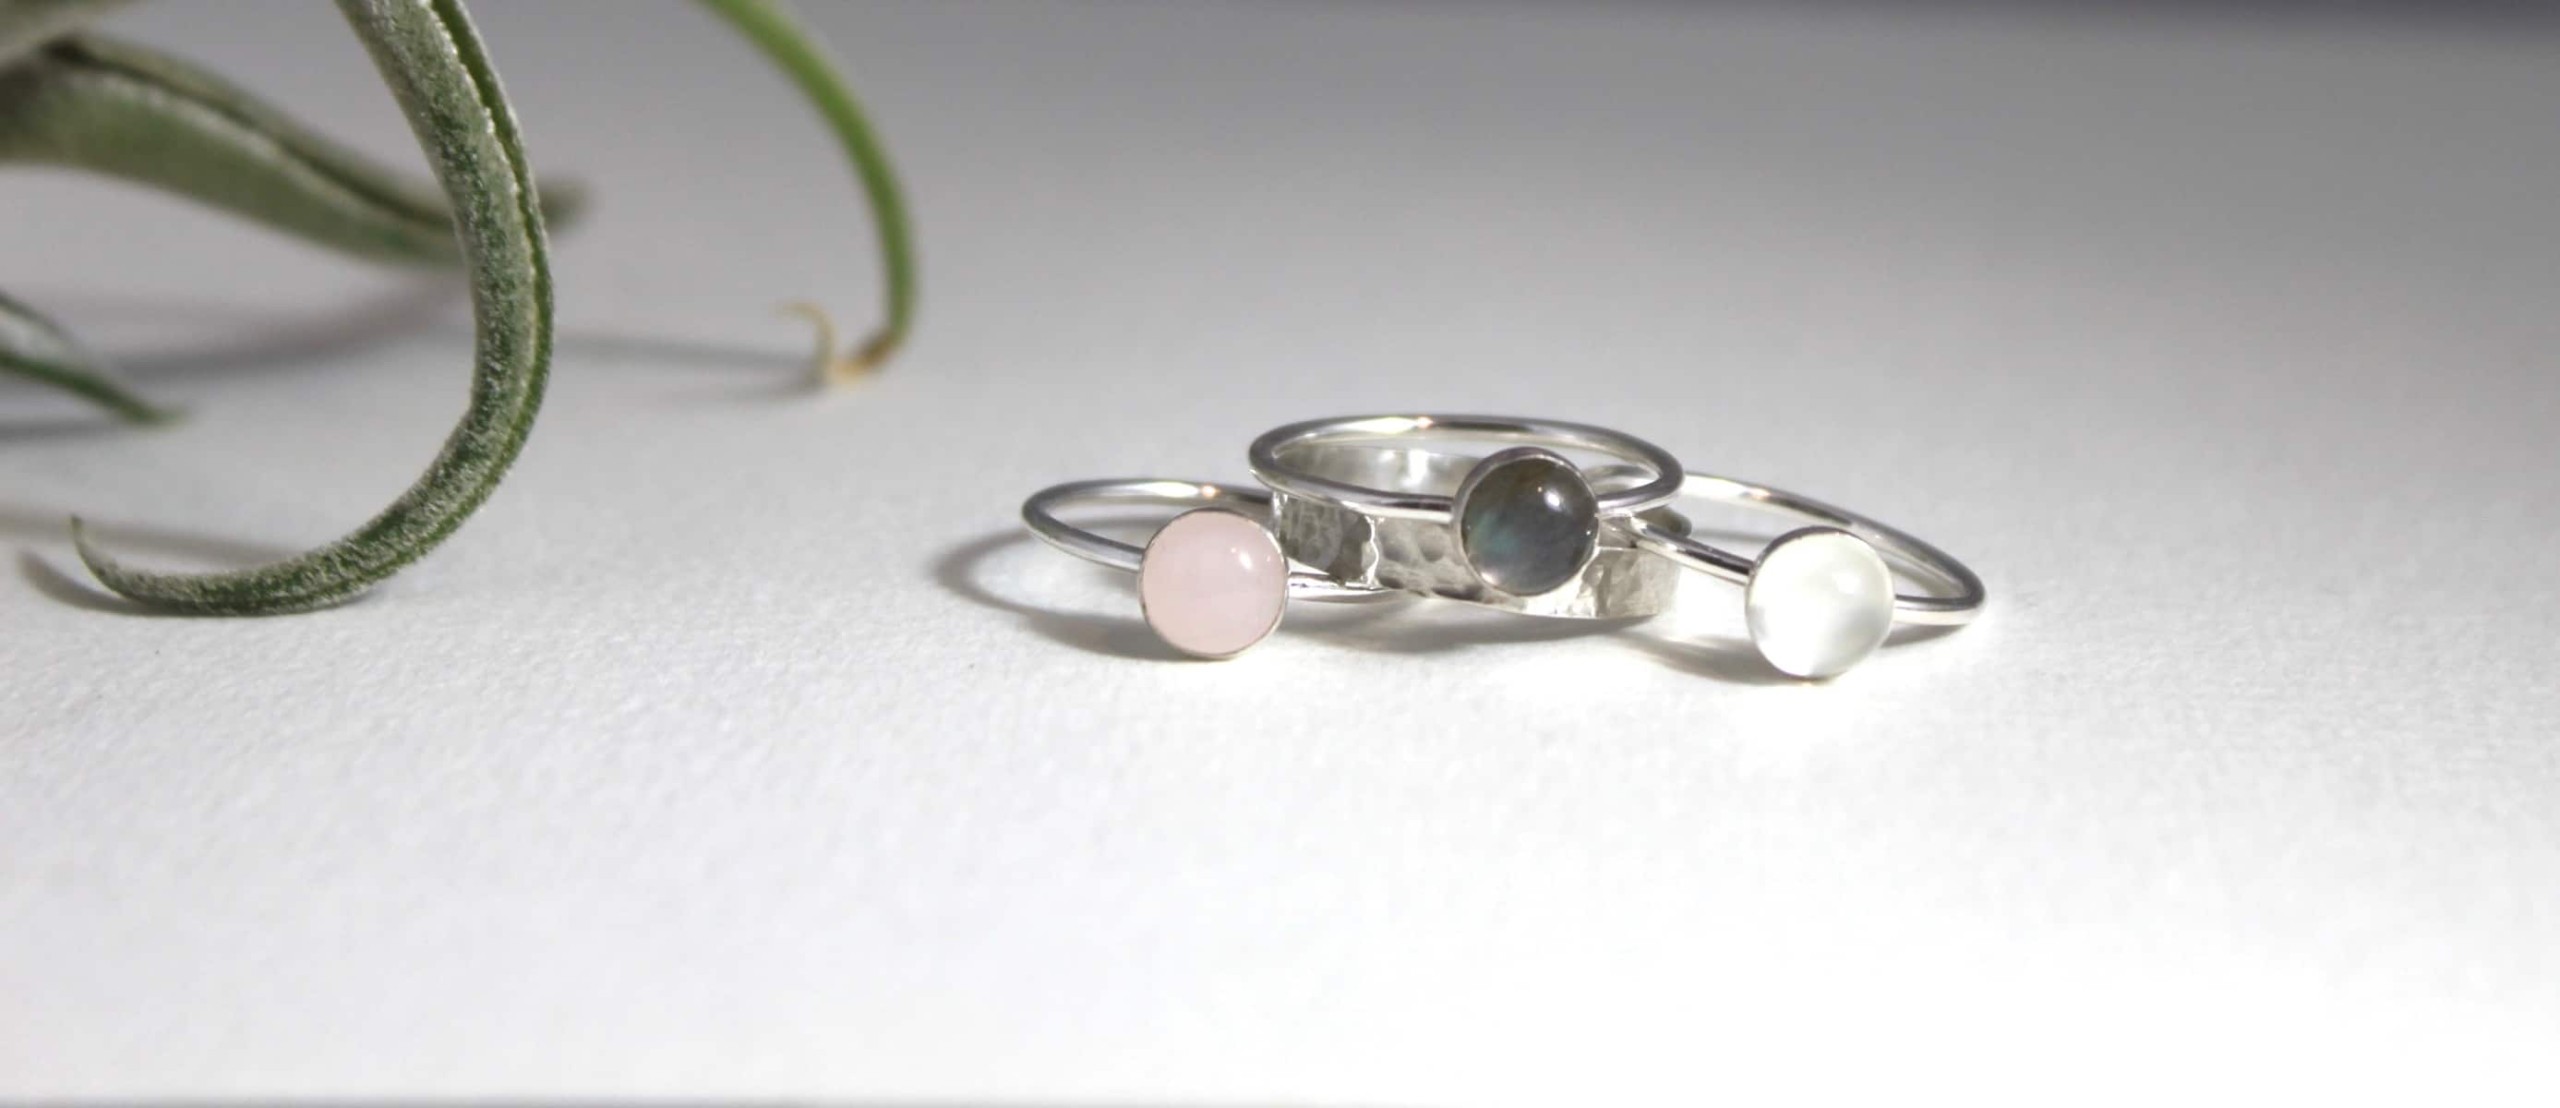 You are currently viewing Handcrafted Silver Jewellery